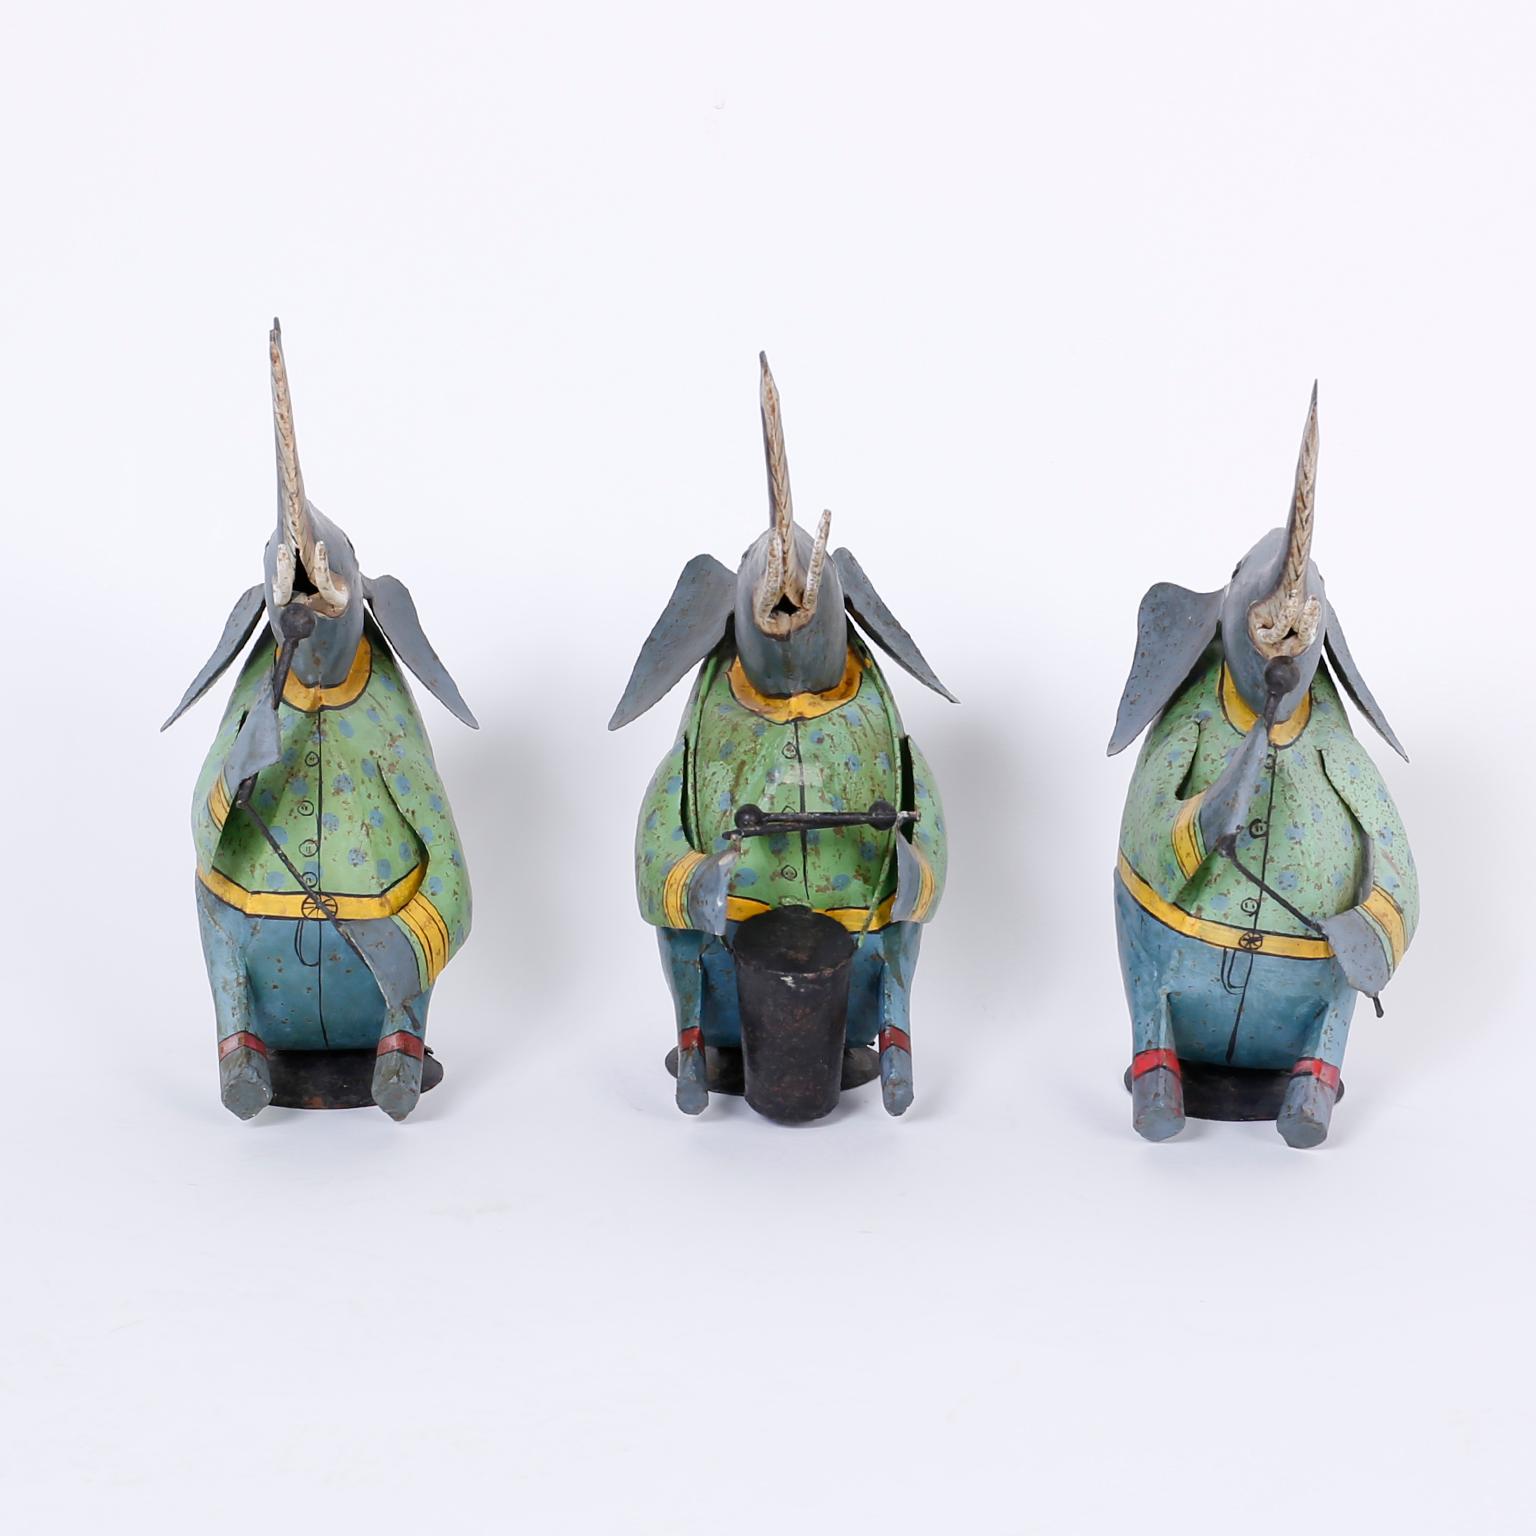 Strike up the band with three amusing, folky painted metal elephants singing and drumming in gay attire with a rustic oxidized finish.